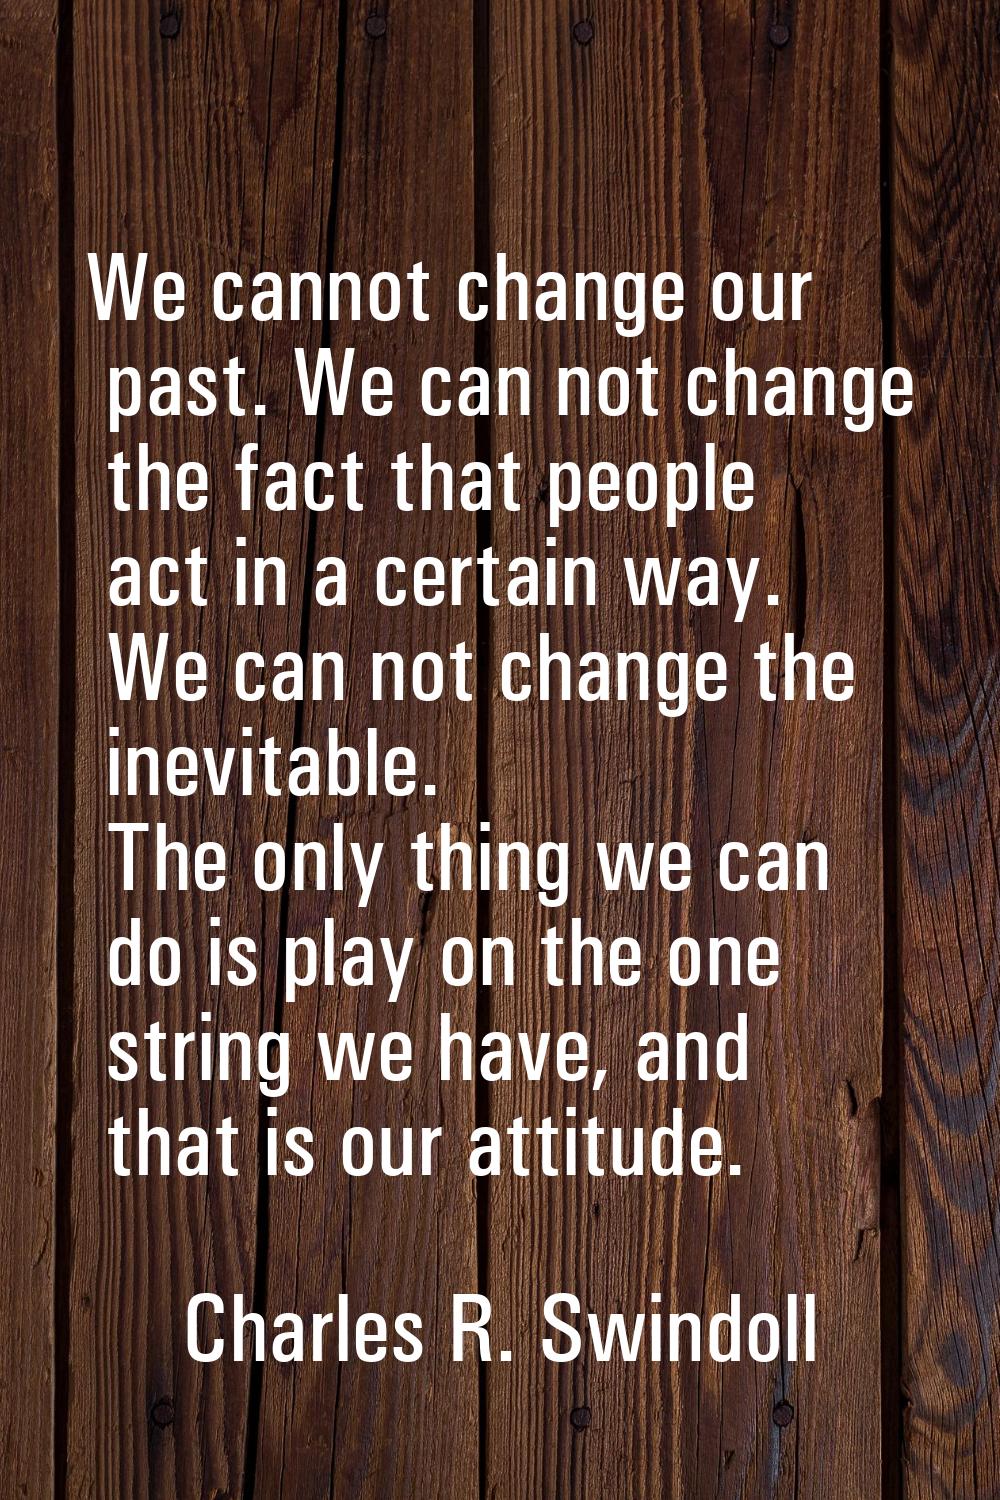 We cannot change our past. We can not change the fact that people act in a certain way. We can not 